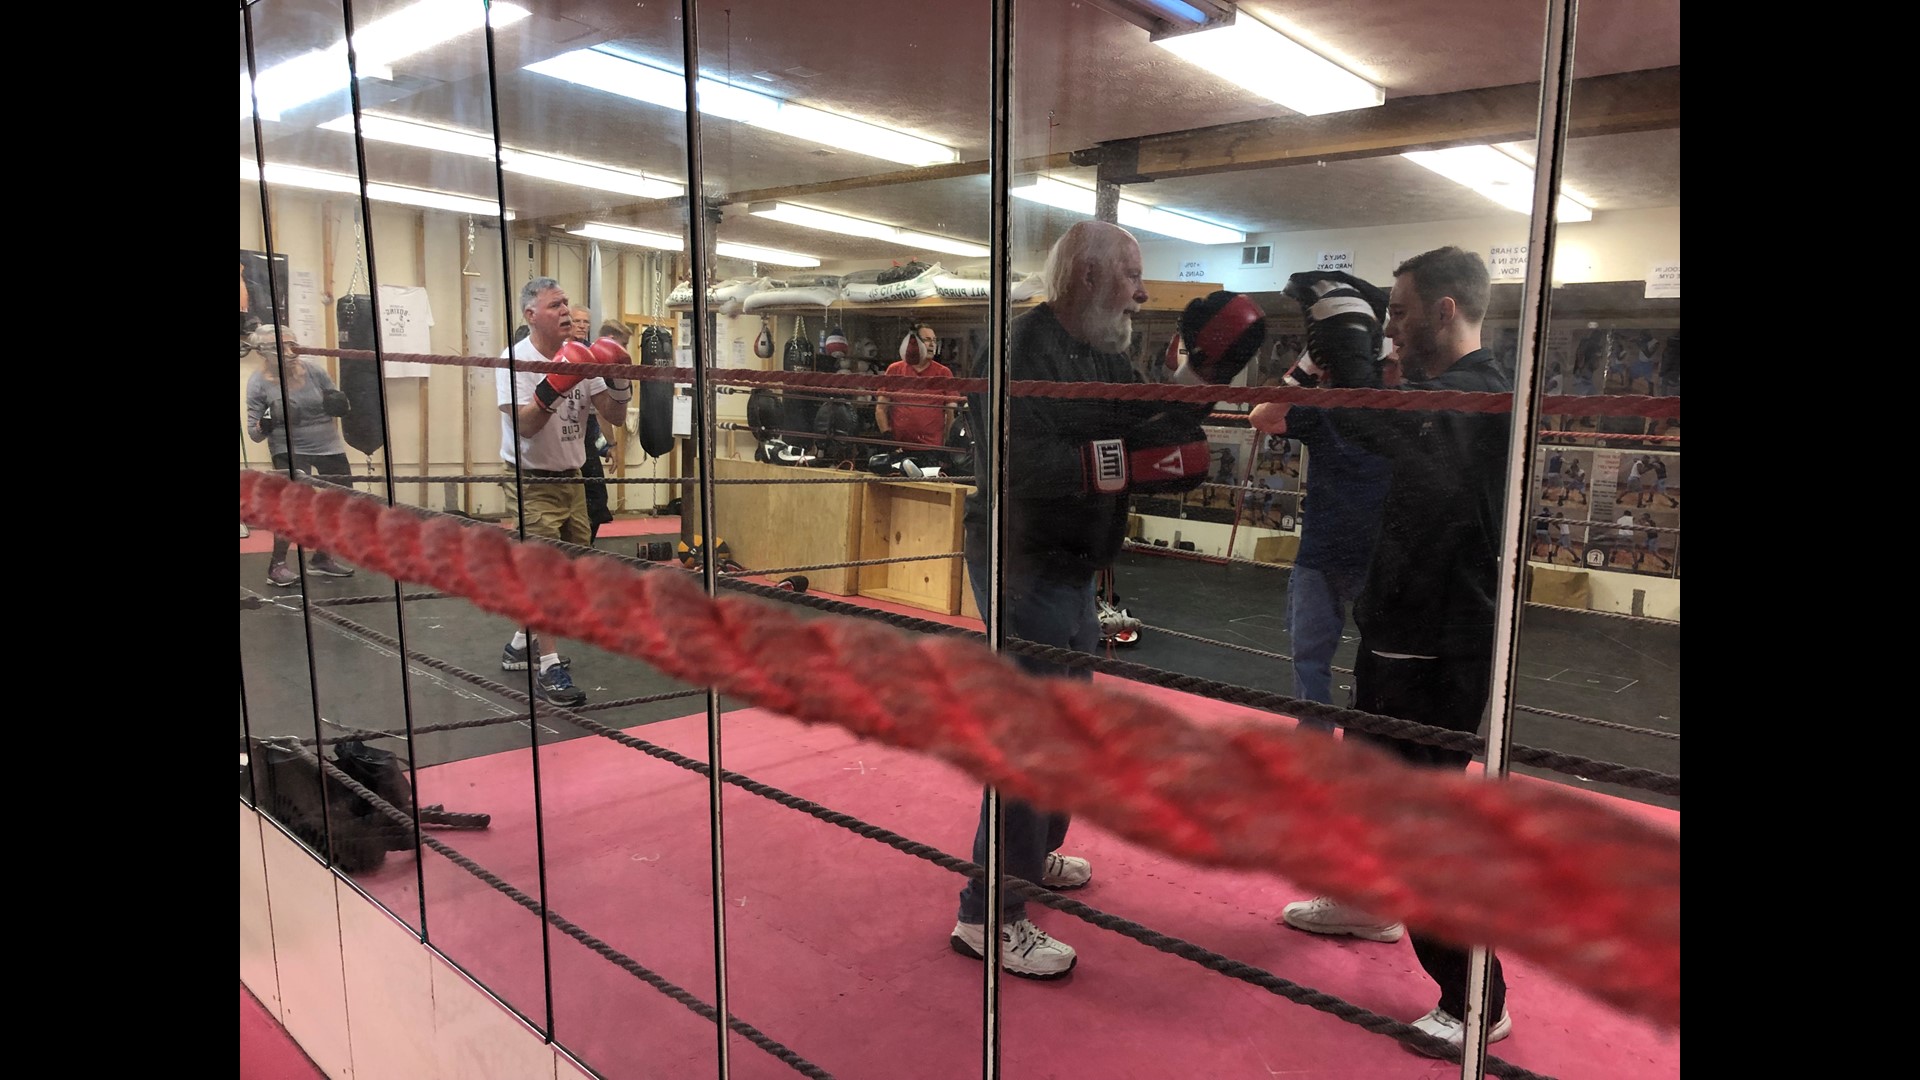 KREM's Nicole Hernadez takes us inside Legacy Boxing where a new class is changing lives.